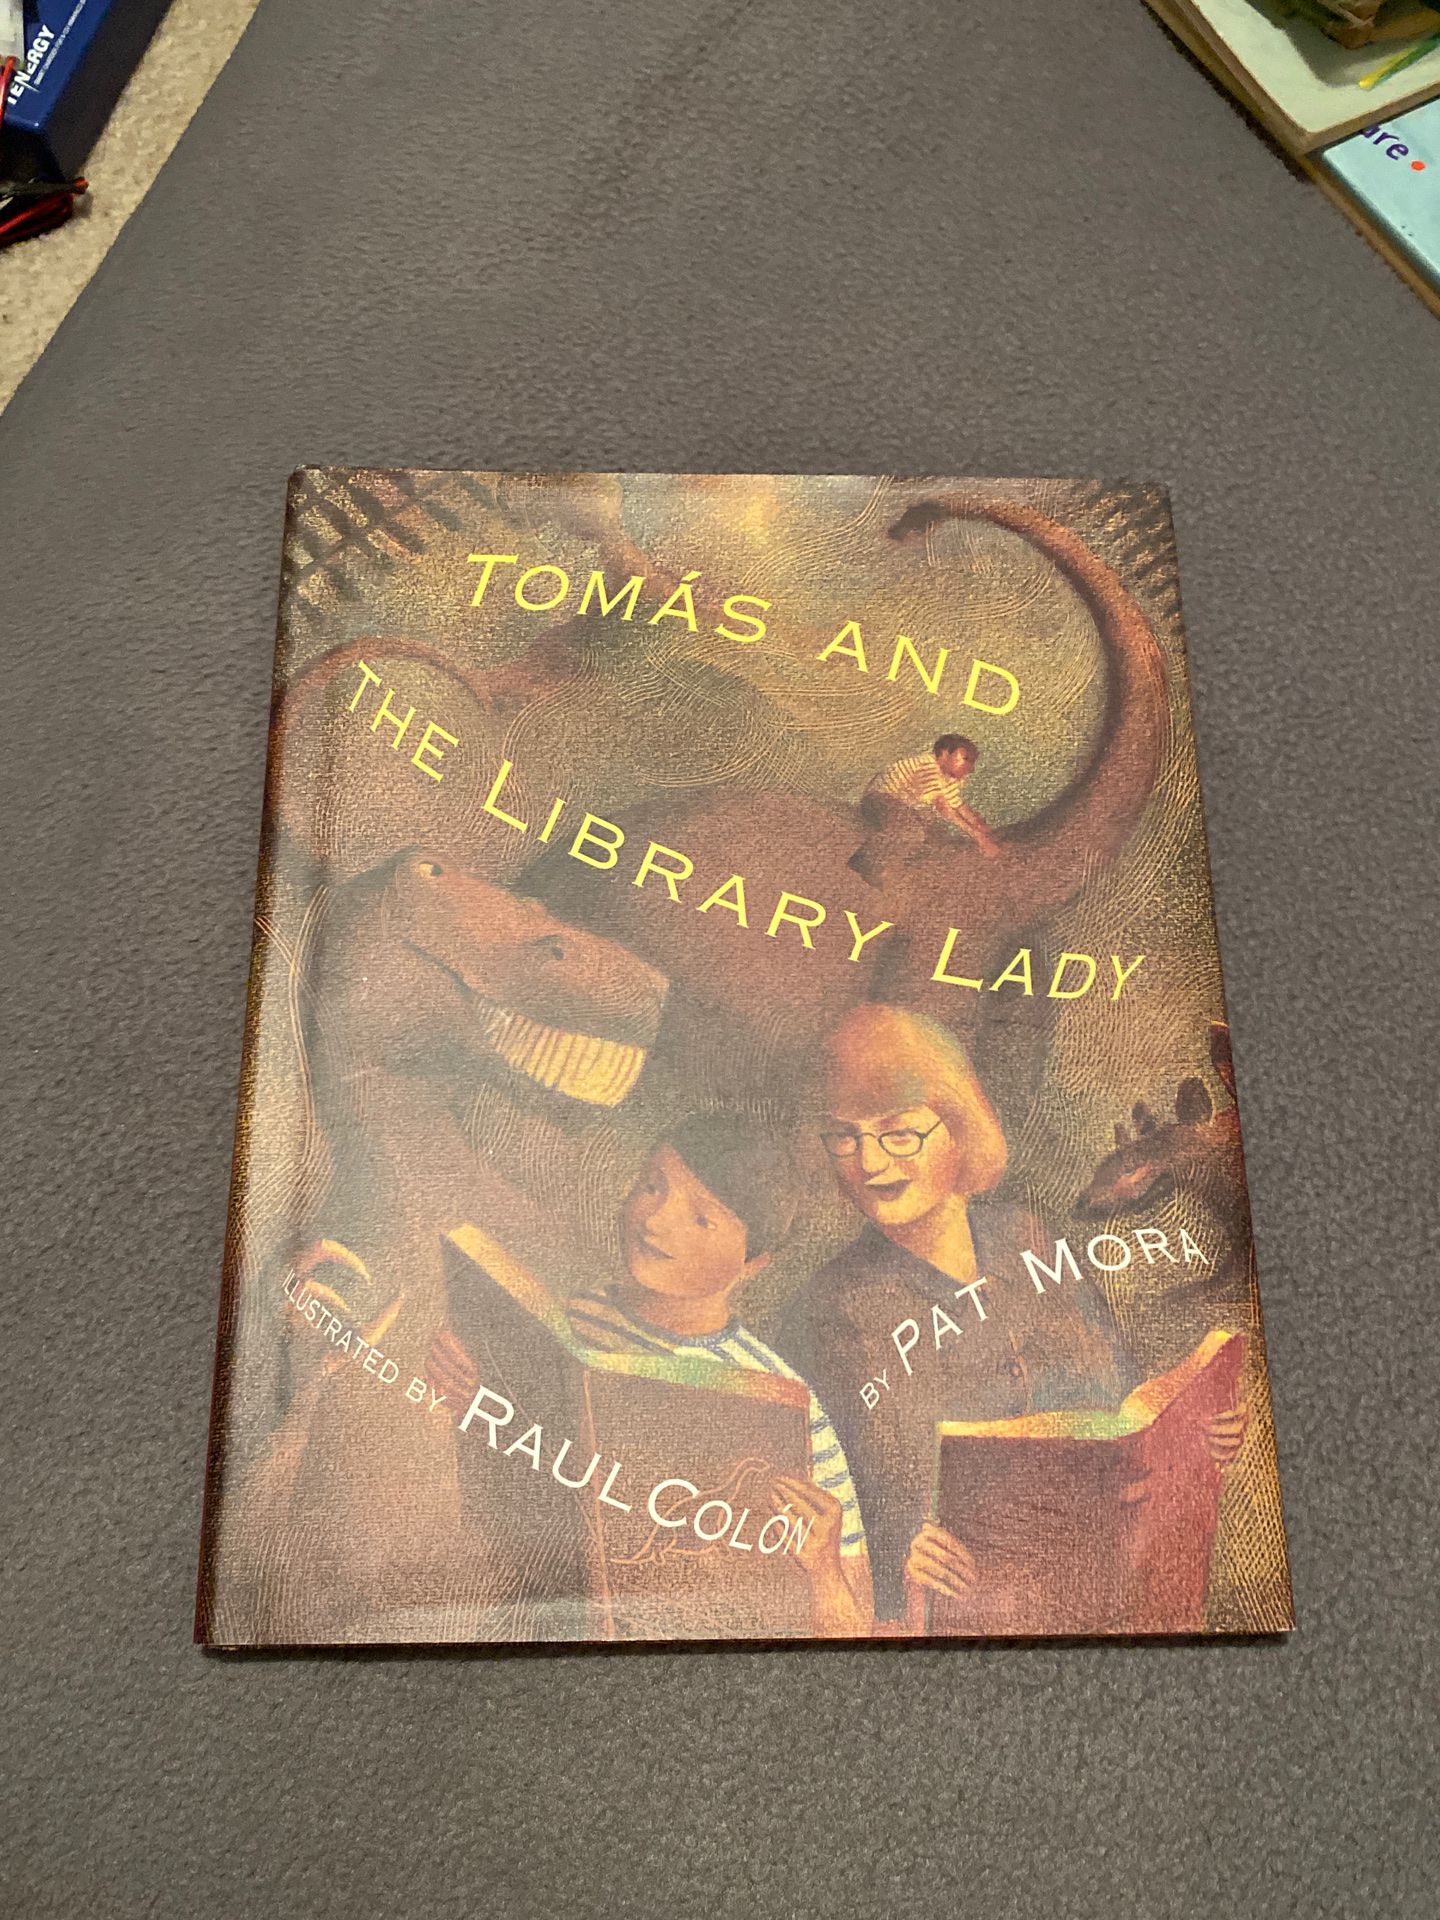 Tomas and the library lady by Pat Mora